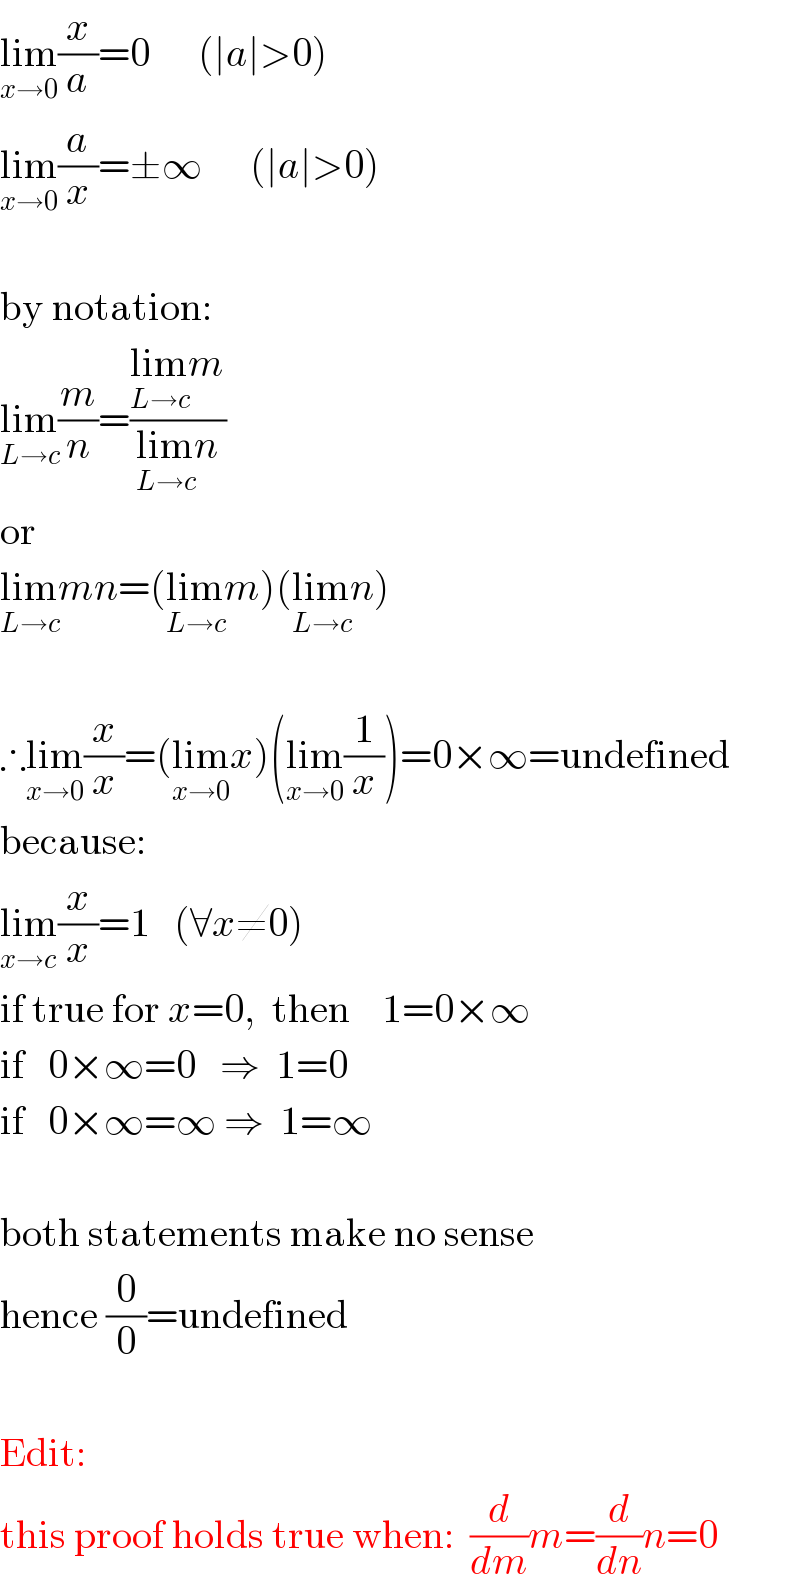 lim_(x→0) (x/a)=0      (∣a∣>0)  lim_(x→0) (a/x)=±∞      (∣a∣>0)     by notation:  lim_(L→c) (m/n)=((lim_(L→c) m)/(lim_(L→c) n))  or  lim_(L→c) mn=(lim_(L→c) m)(lim_(L→c) n)    ∴lim_(x→0) (x/x)=(lim_(x→0) x)(lim_(x→0) (1/x))=0×∞=undefined  because:  lim_(x→c) (x/x)=1   (∀x≠0)  if true for x=0,  then    1=0×∞  if   0×∞=0   ⇒  1=0  if   0×∞=∞ ⇒  1=∞    both statements make no sense  hence (0/0)=undefined     Edit:  this proof holds true when:  (d/dm)m=(d/dn)n=0  